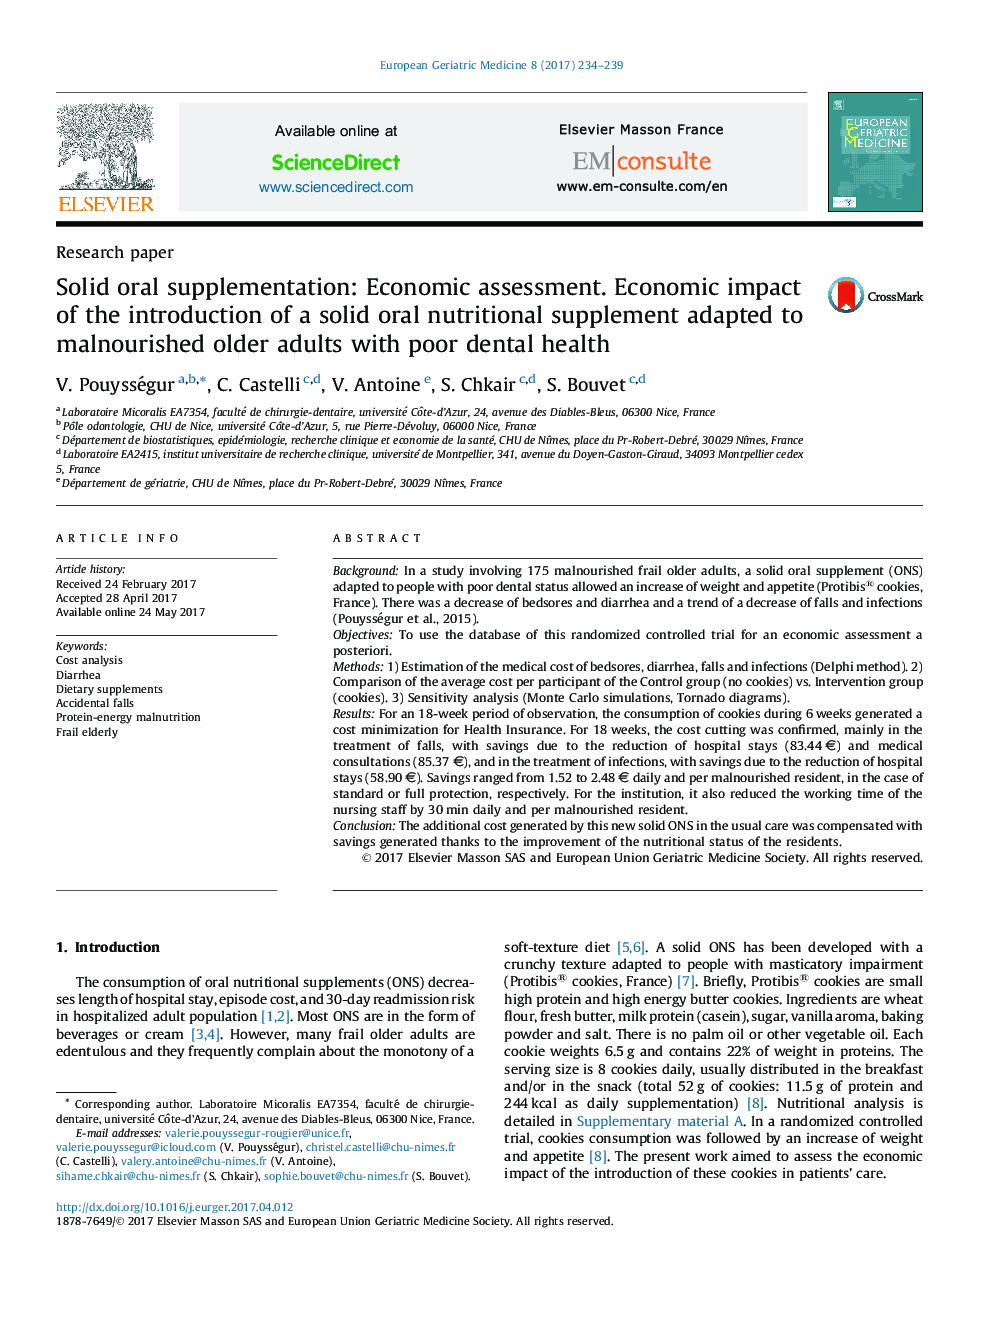 Solid oral supplementation: Economic assessment. Economic impact of the introduction of a solid oral nutritional supplement adapted to malnourished older adults with poor dental health